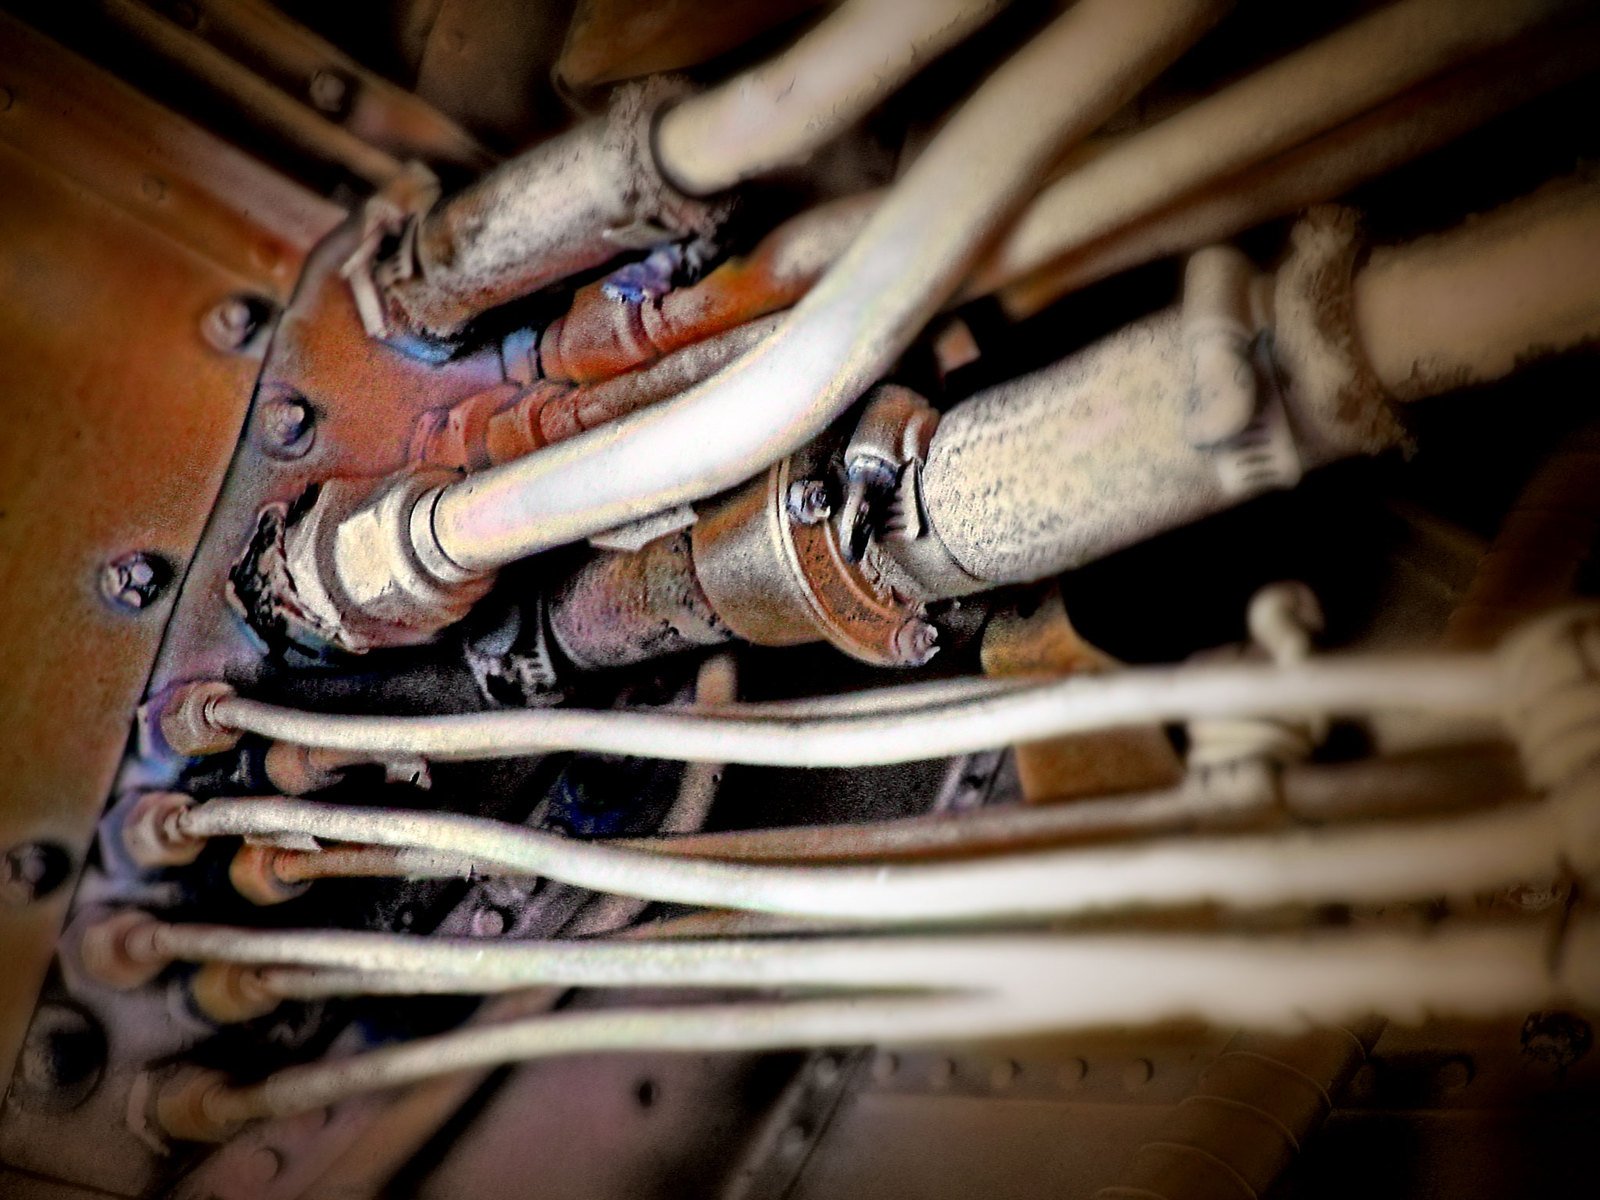 there are many wires in the electrical panel